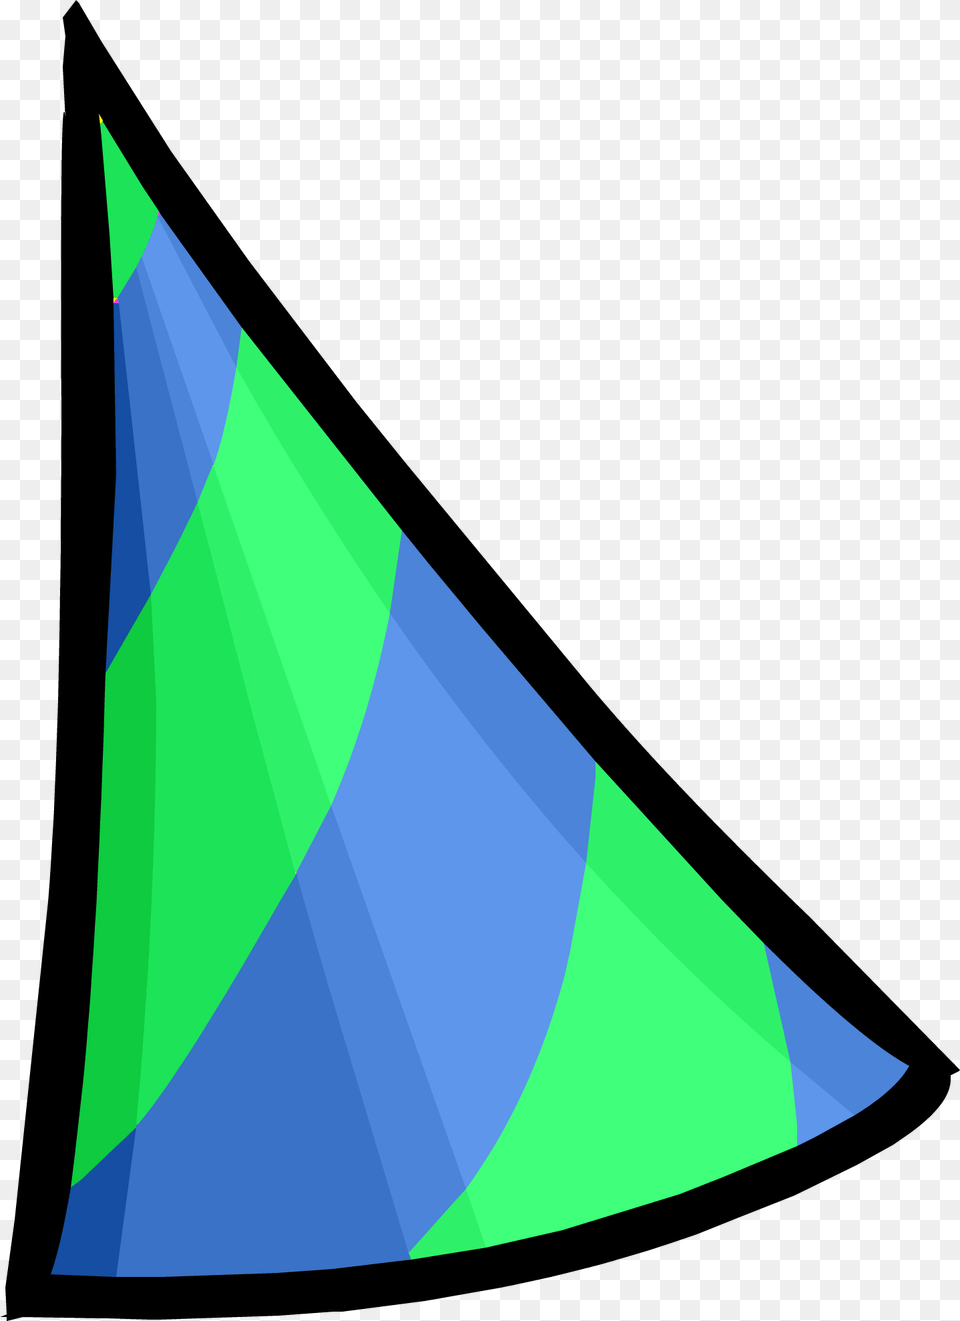 Vintage Penguin Wiki Green And Blue Party Hat, Triangle, Clothing, Rocket, Weapon Png